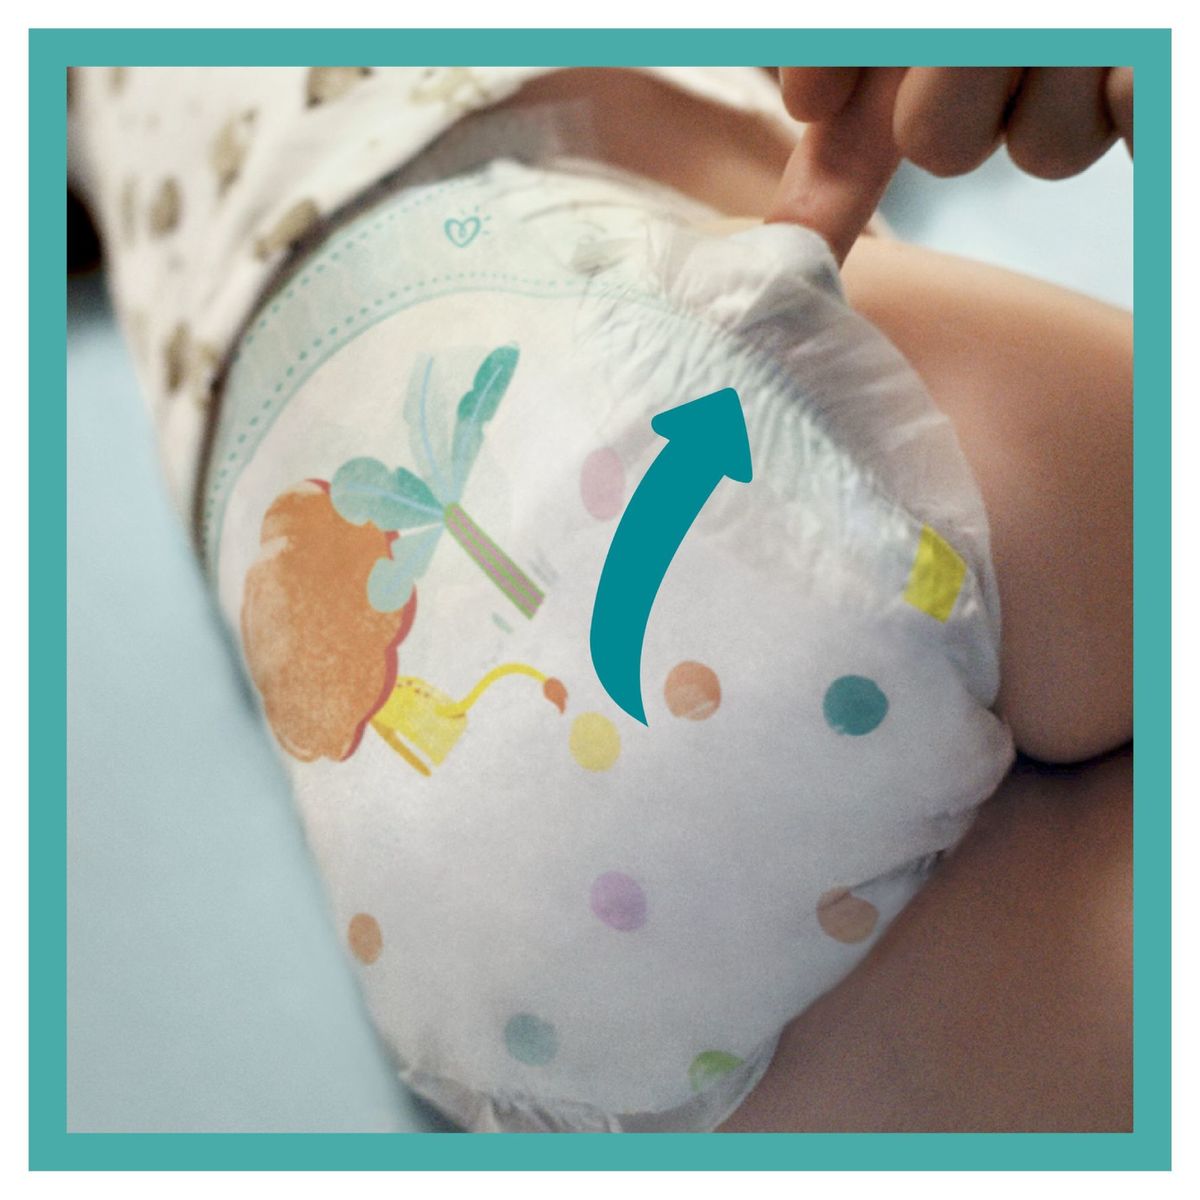 Pampers Baby-Dry Taille 3, 31 Langes, 6-10kg